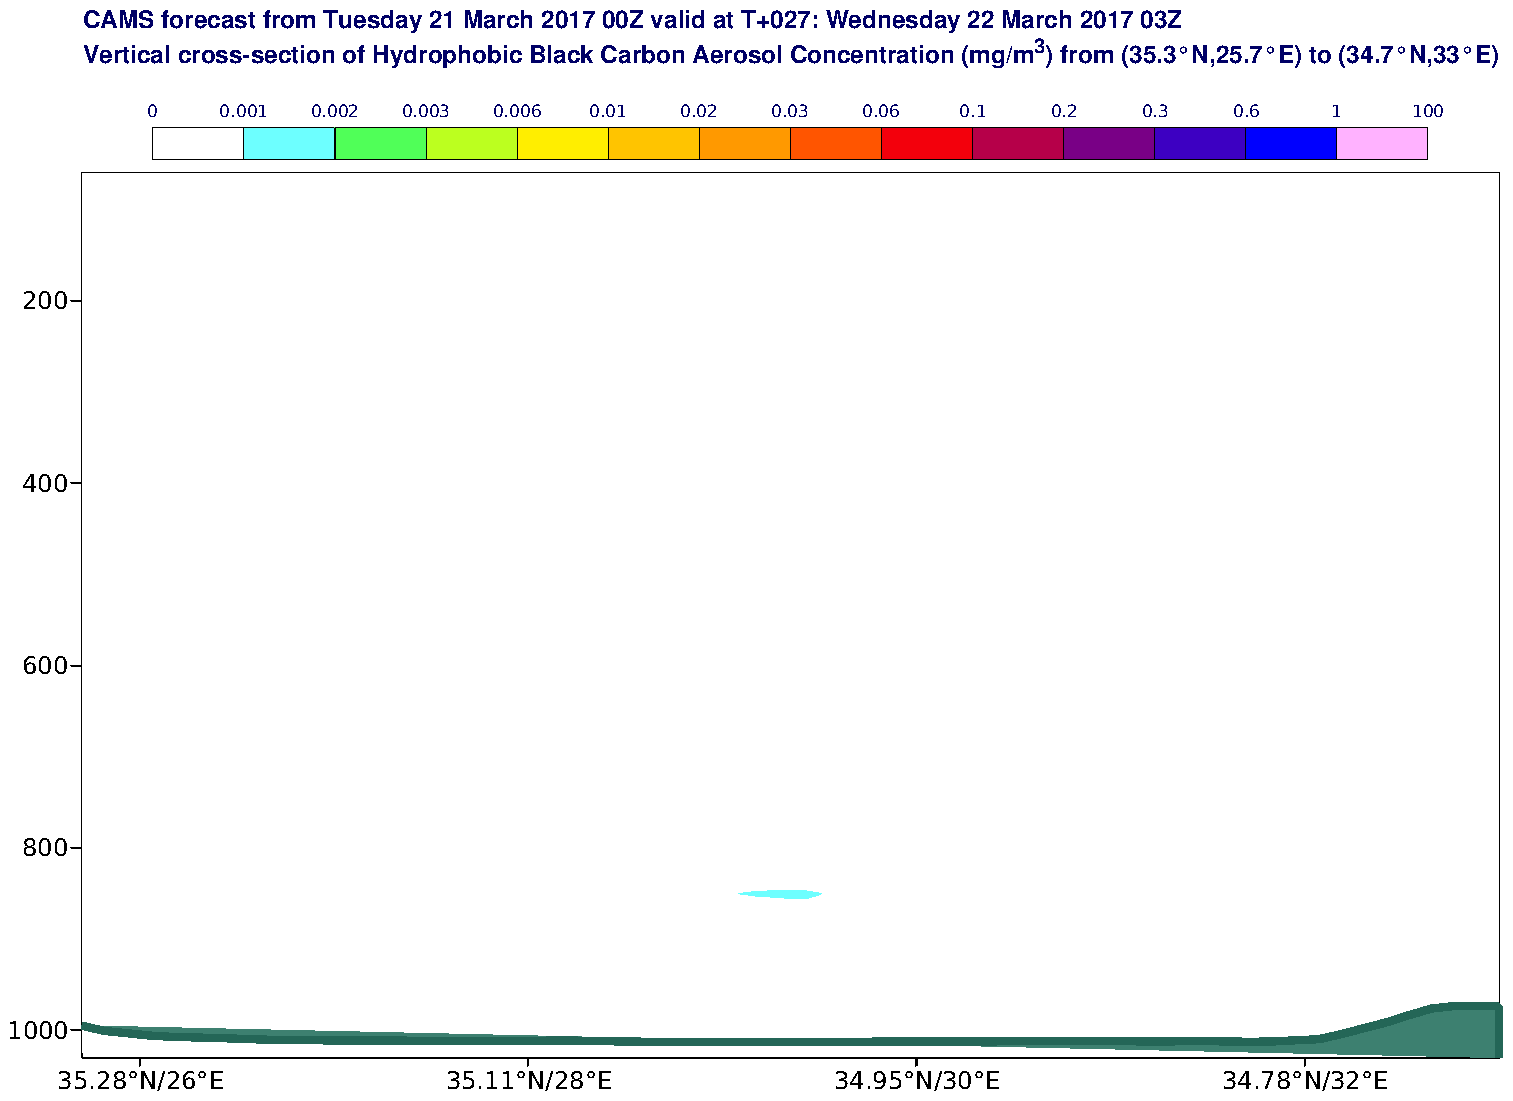 Vertical cross-section of Hydrophobic Black Carbon Aerosol Concentration (mg/m3) valid at T27 - 2017-03-22 03:00